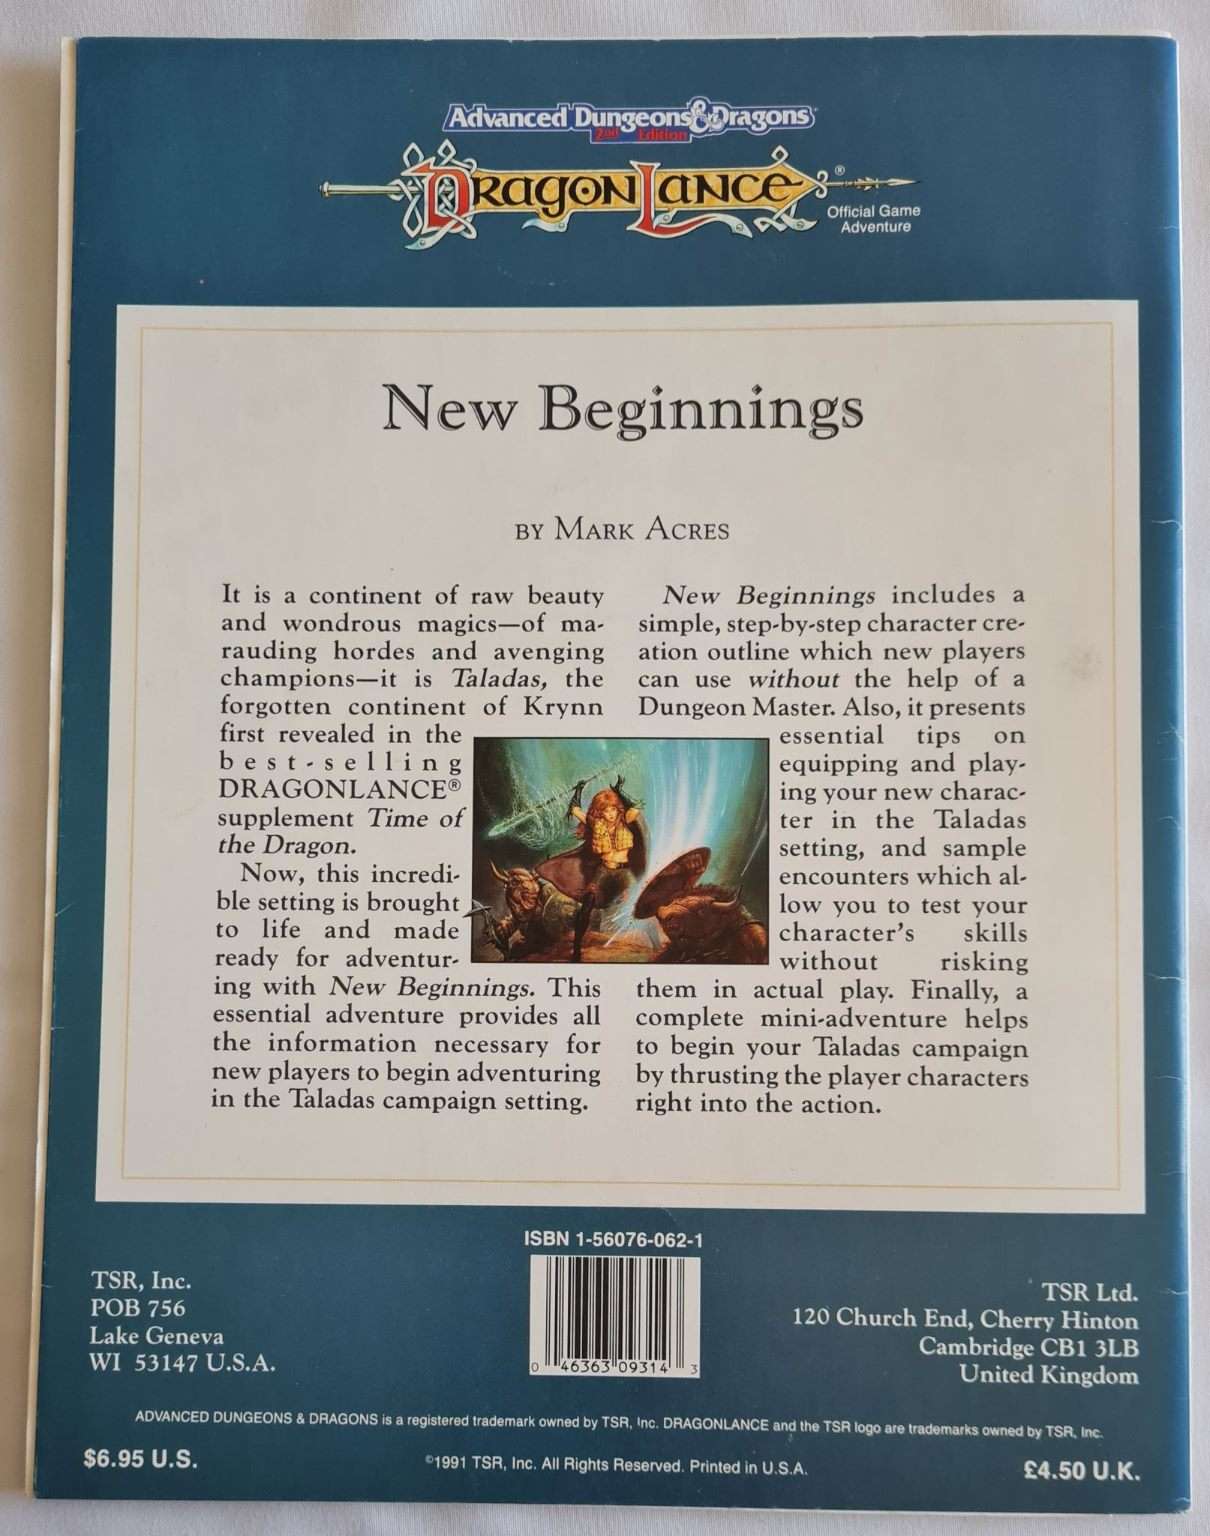 Advanced Dungeons and Dragons - Dragonlance - New Beginnings (DLS1 9314) Default Title